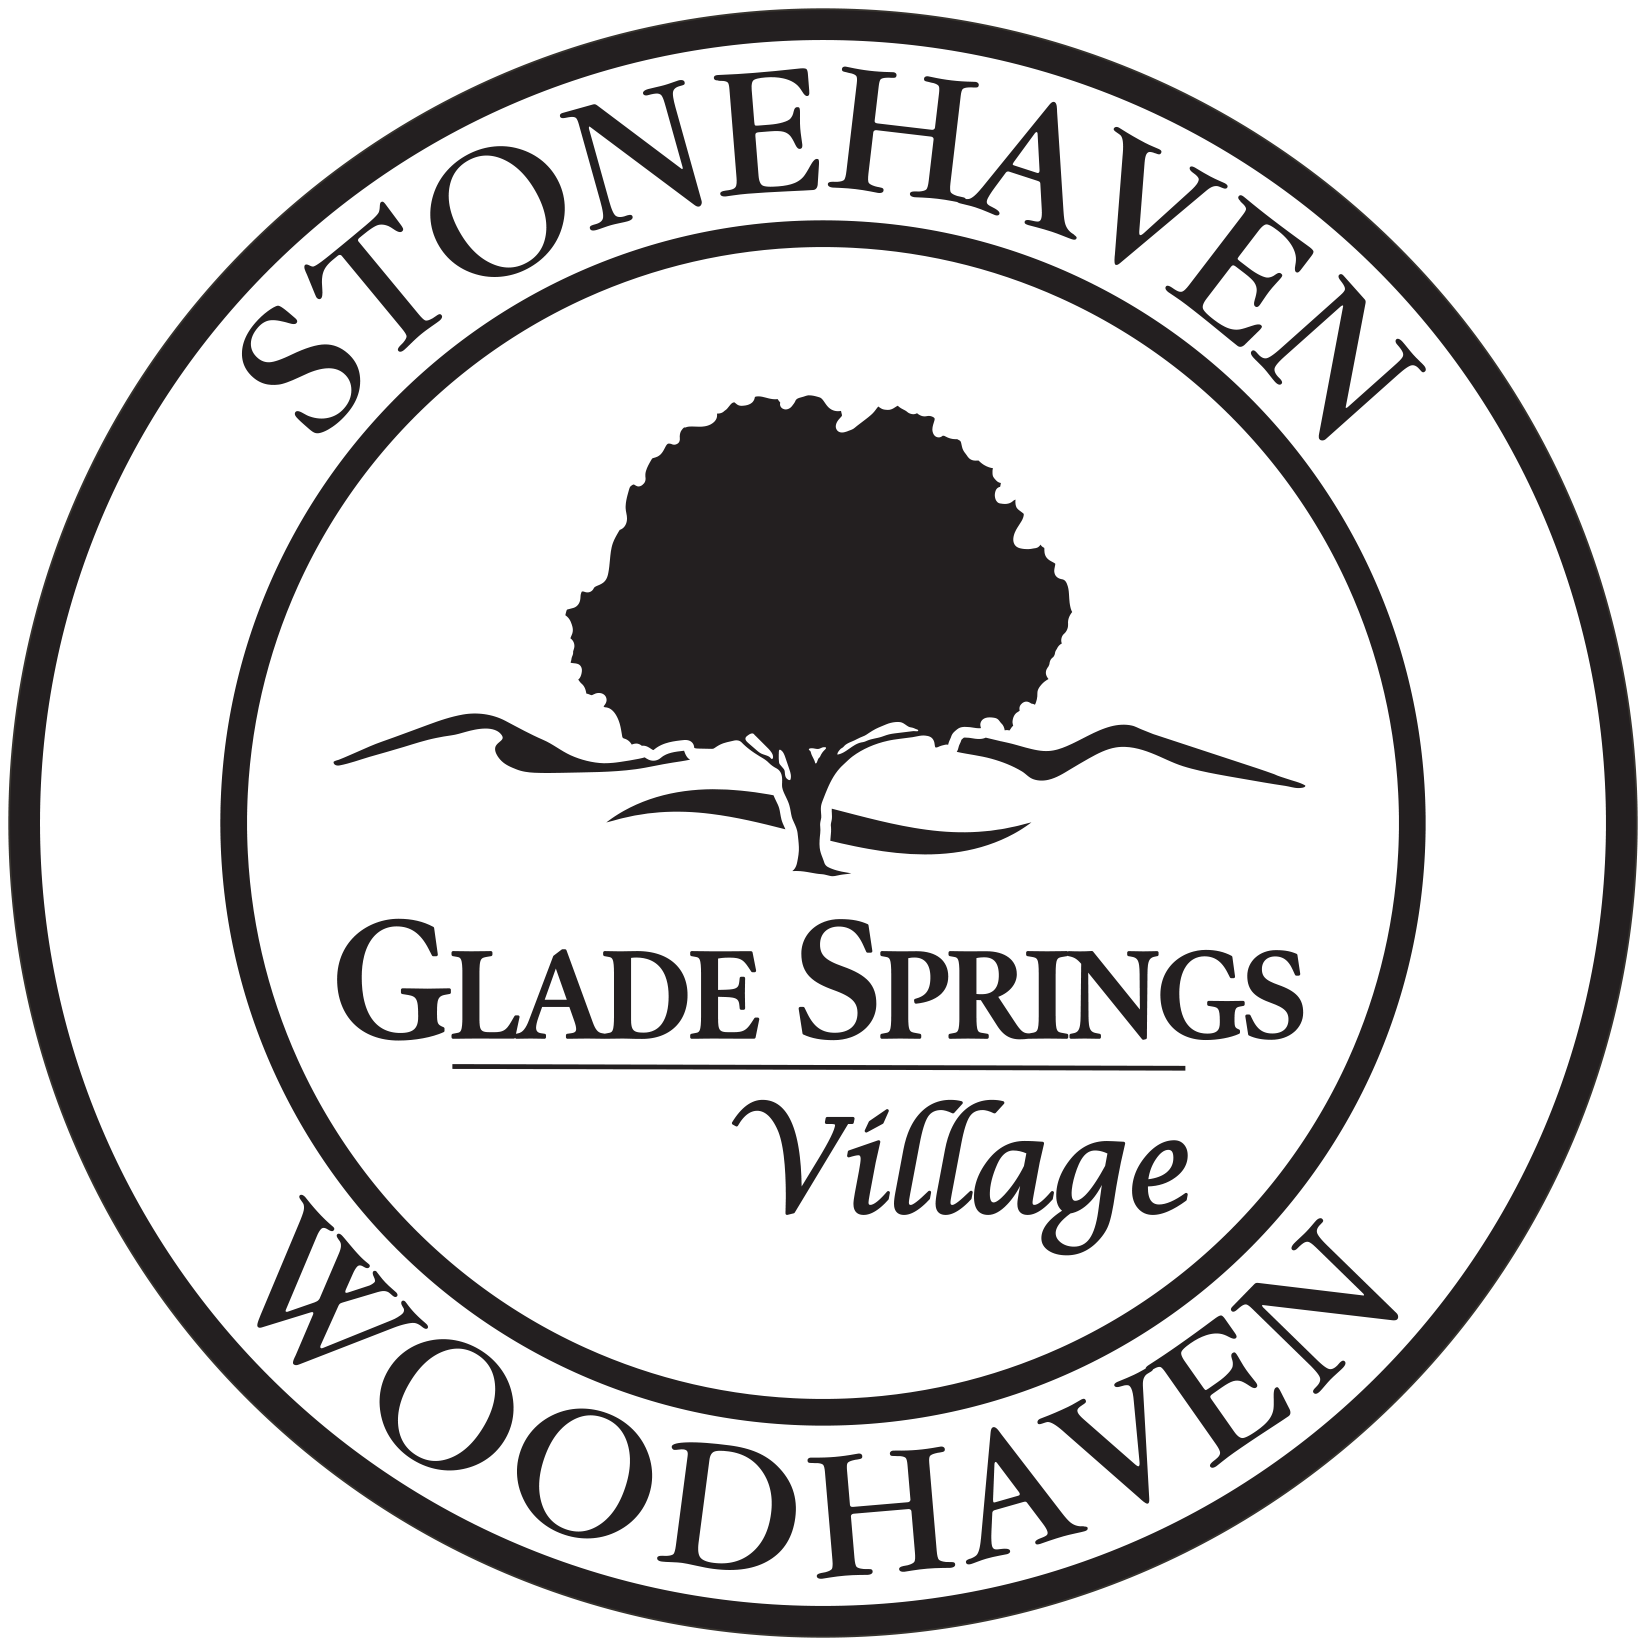 Glade Springs Village Stonehaven and Woodhaven courses logo.